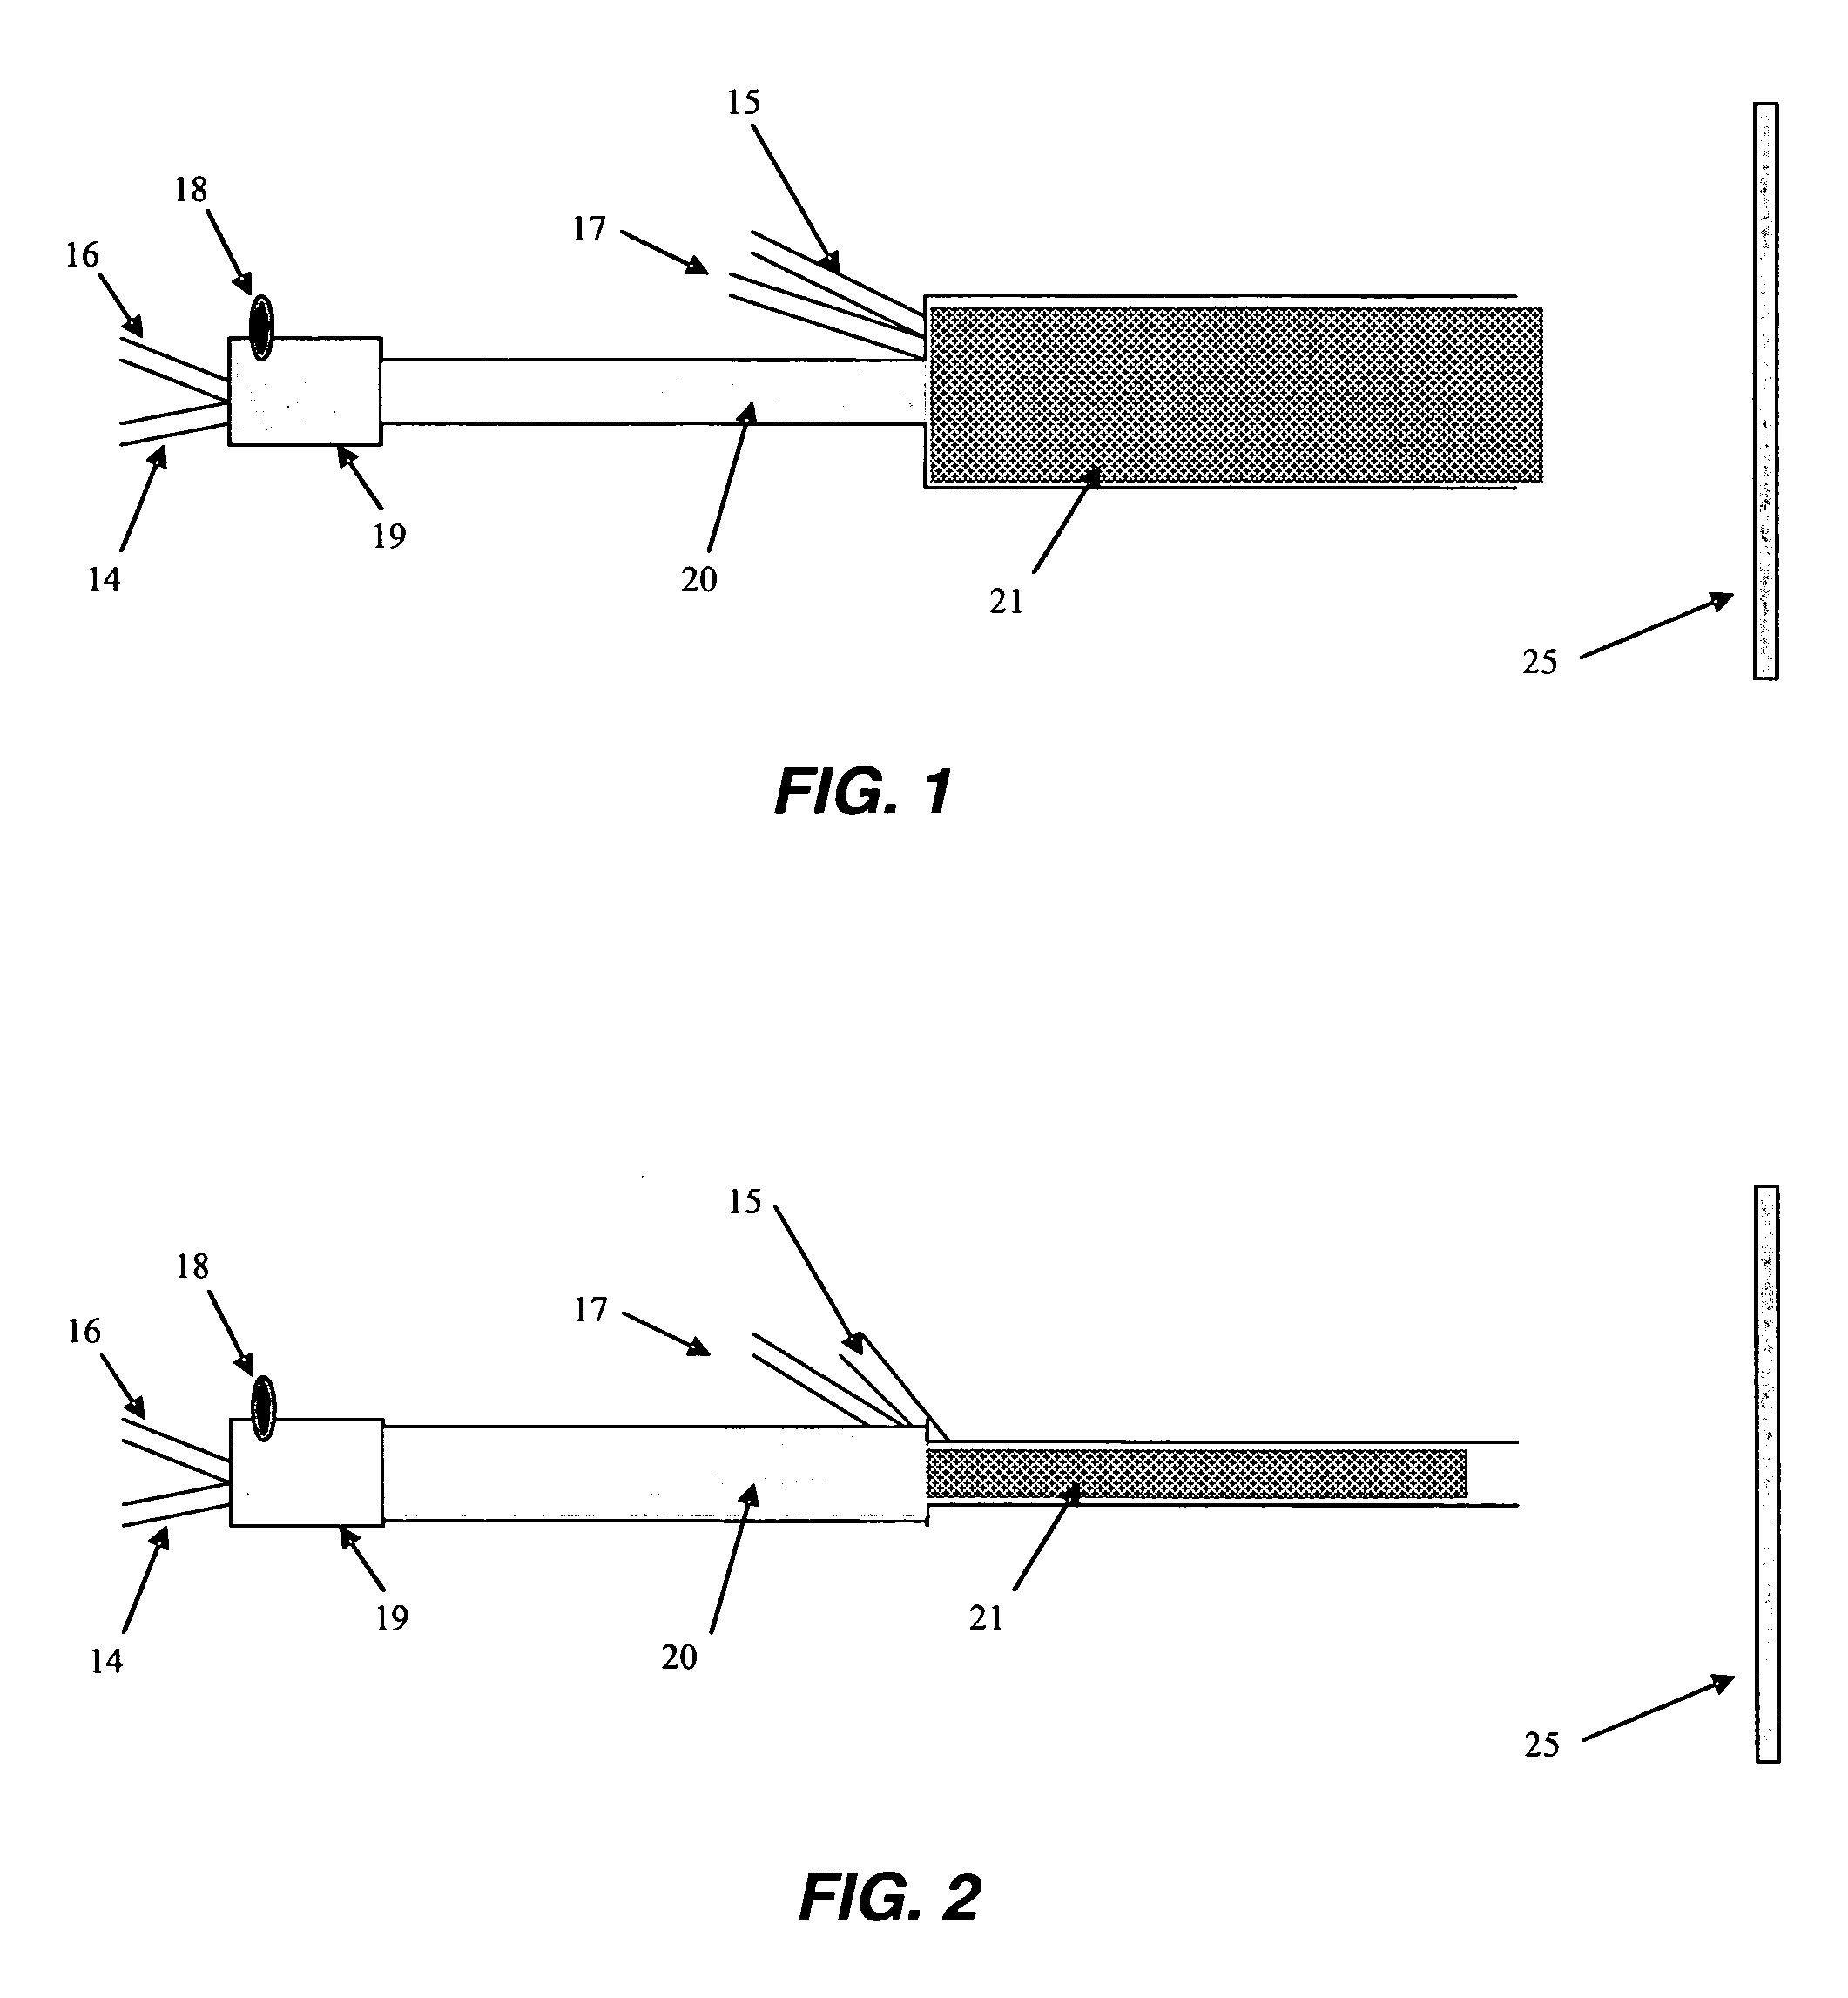 Multi-sectioned pulsed detonation coating apparatus and method of using same